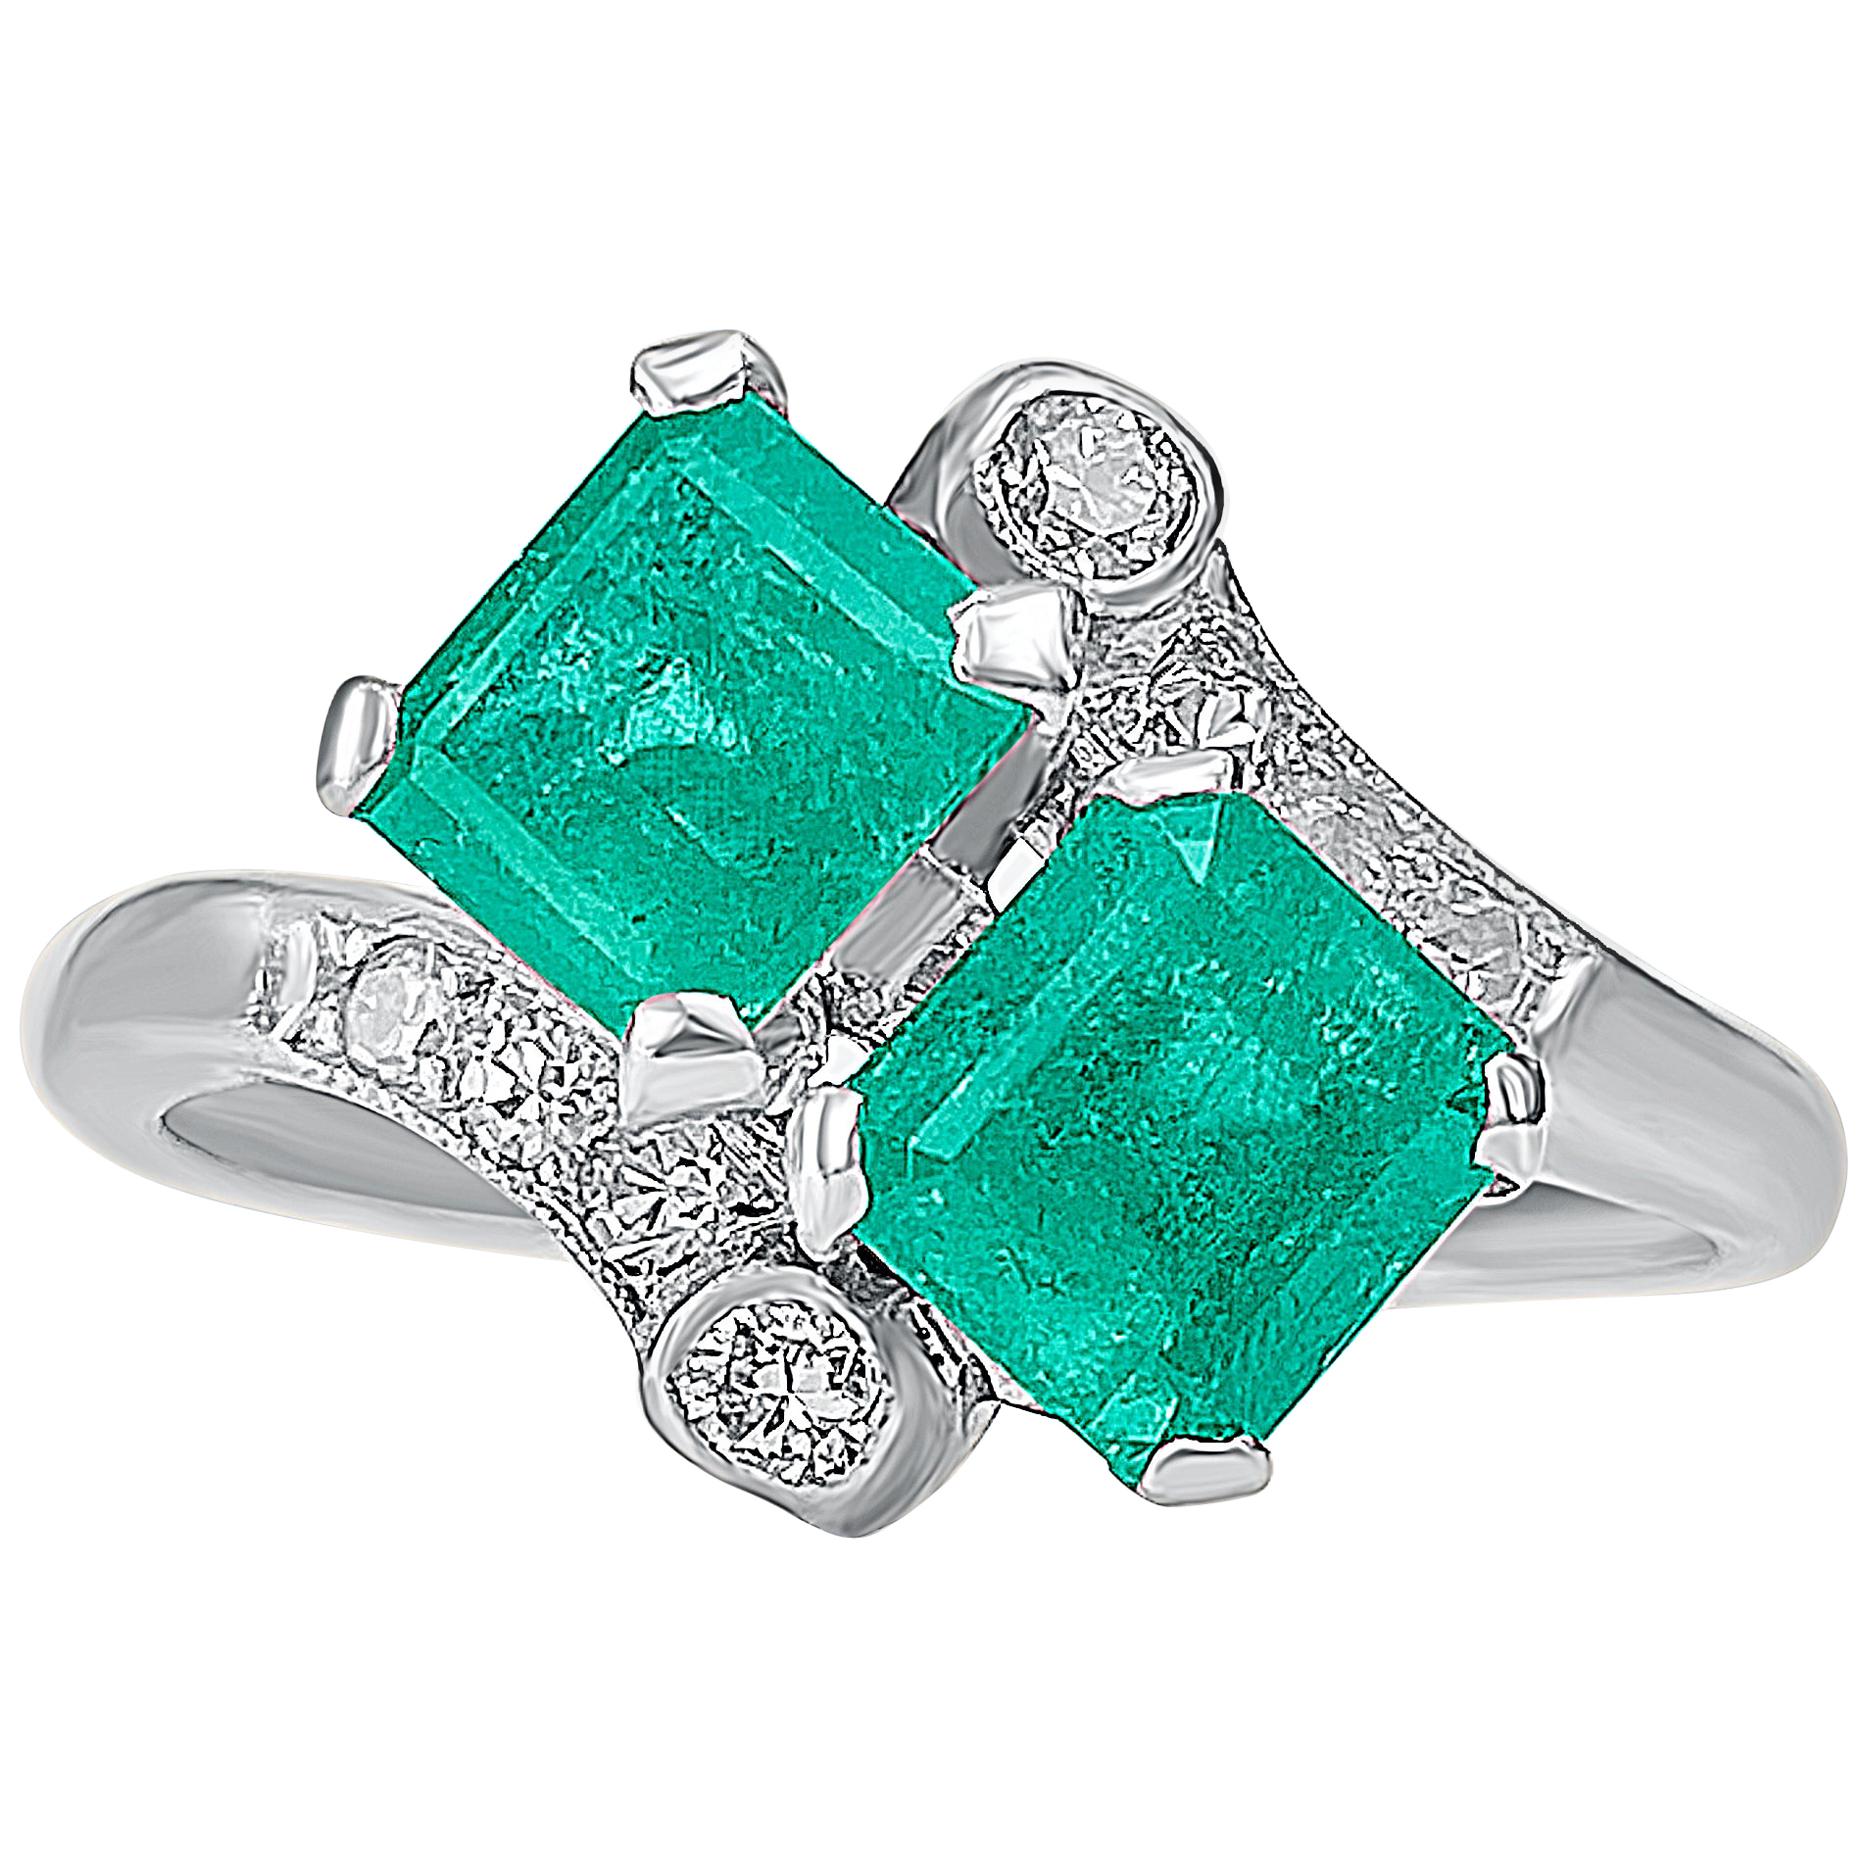 2.16 Carat Colombian Emerald, Diamond and Platinum "Toi Et Moi" Ring For Sale